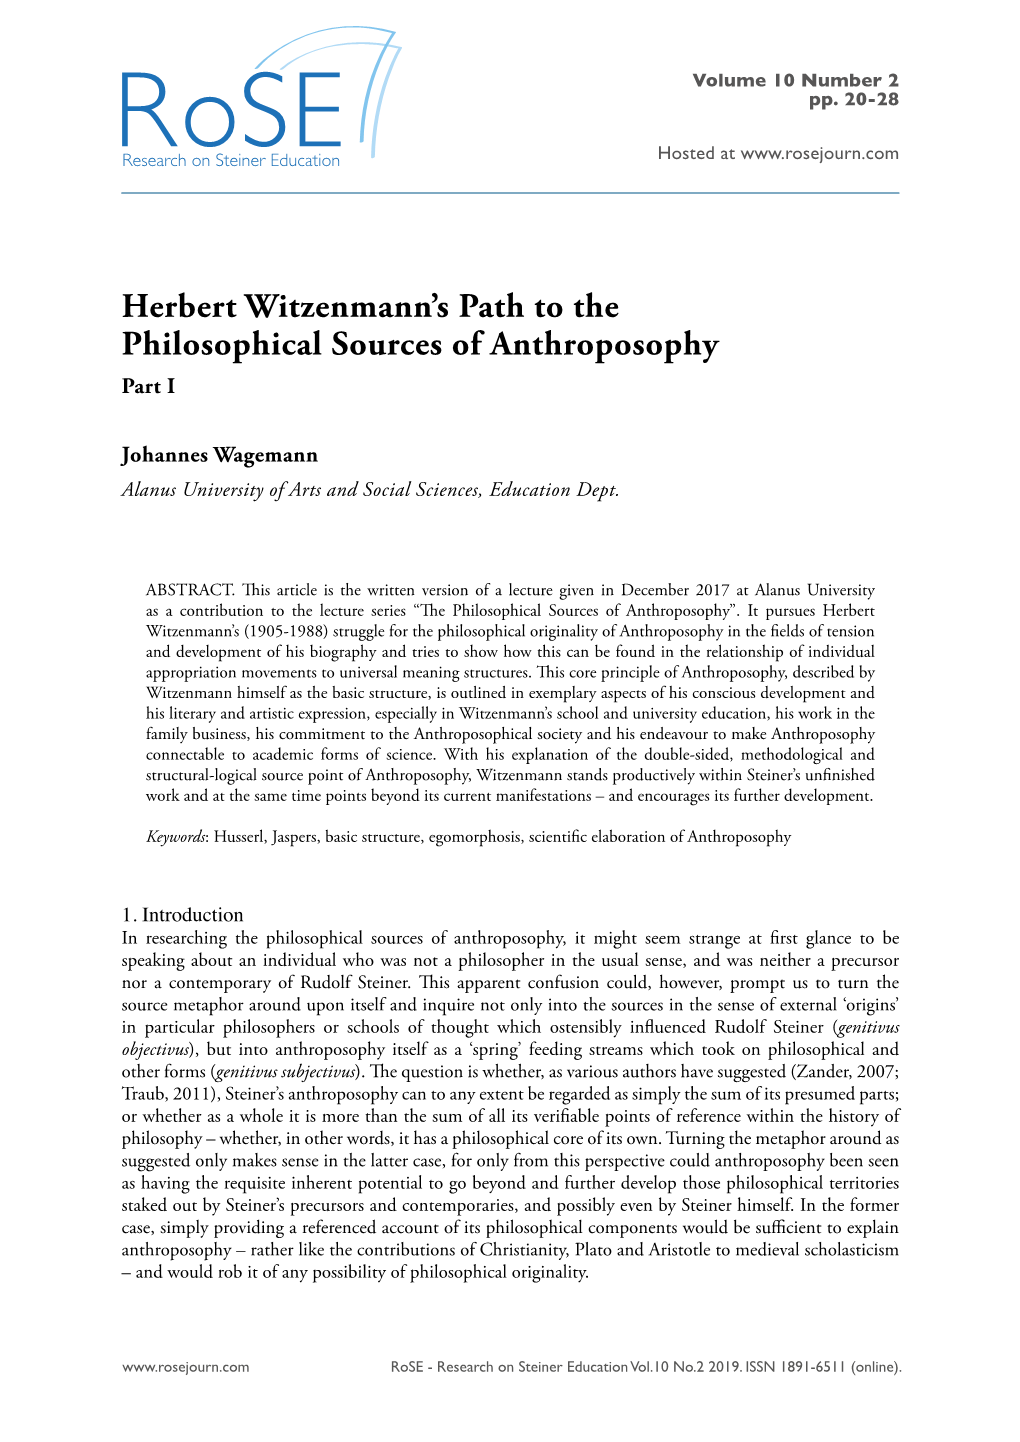 Herbert Witzenmann's Path to the Philosophical Sources Of